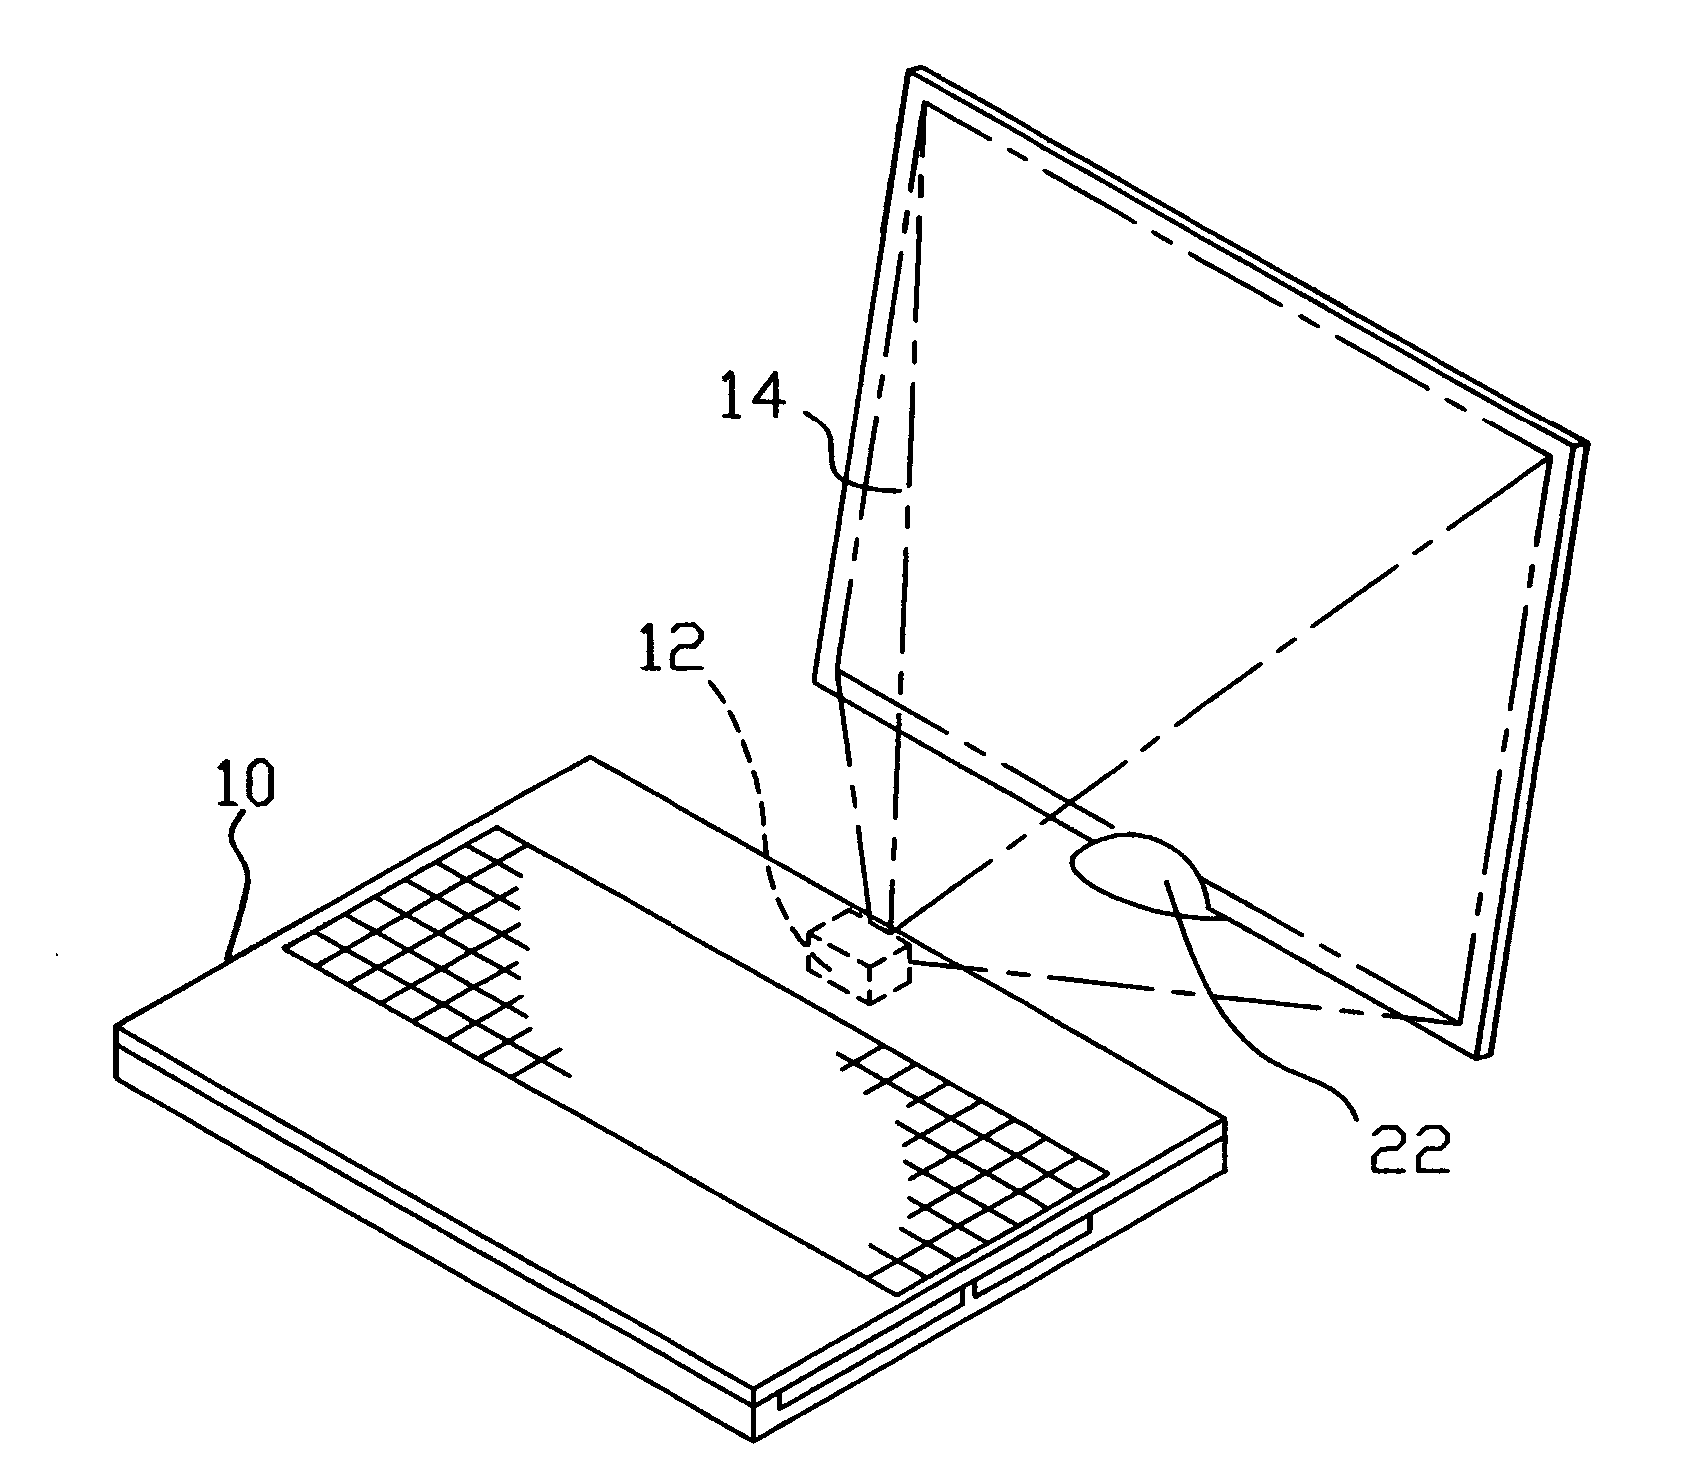 Portable computer with image-projecting function